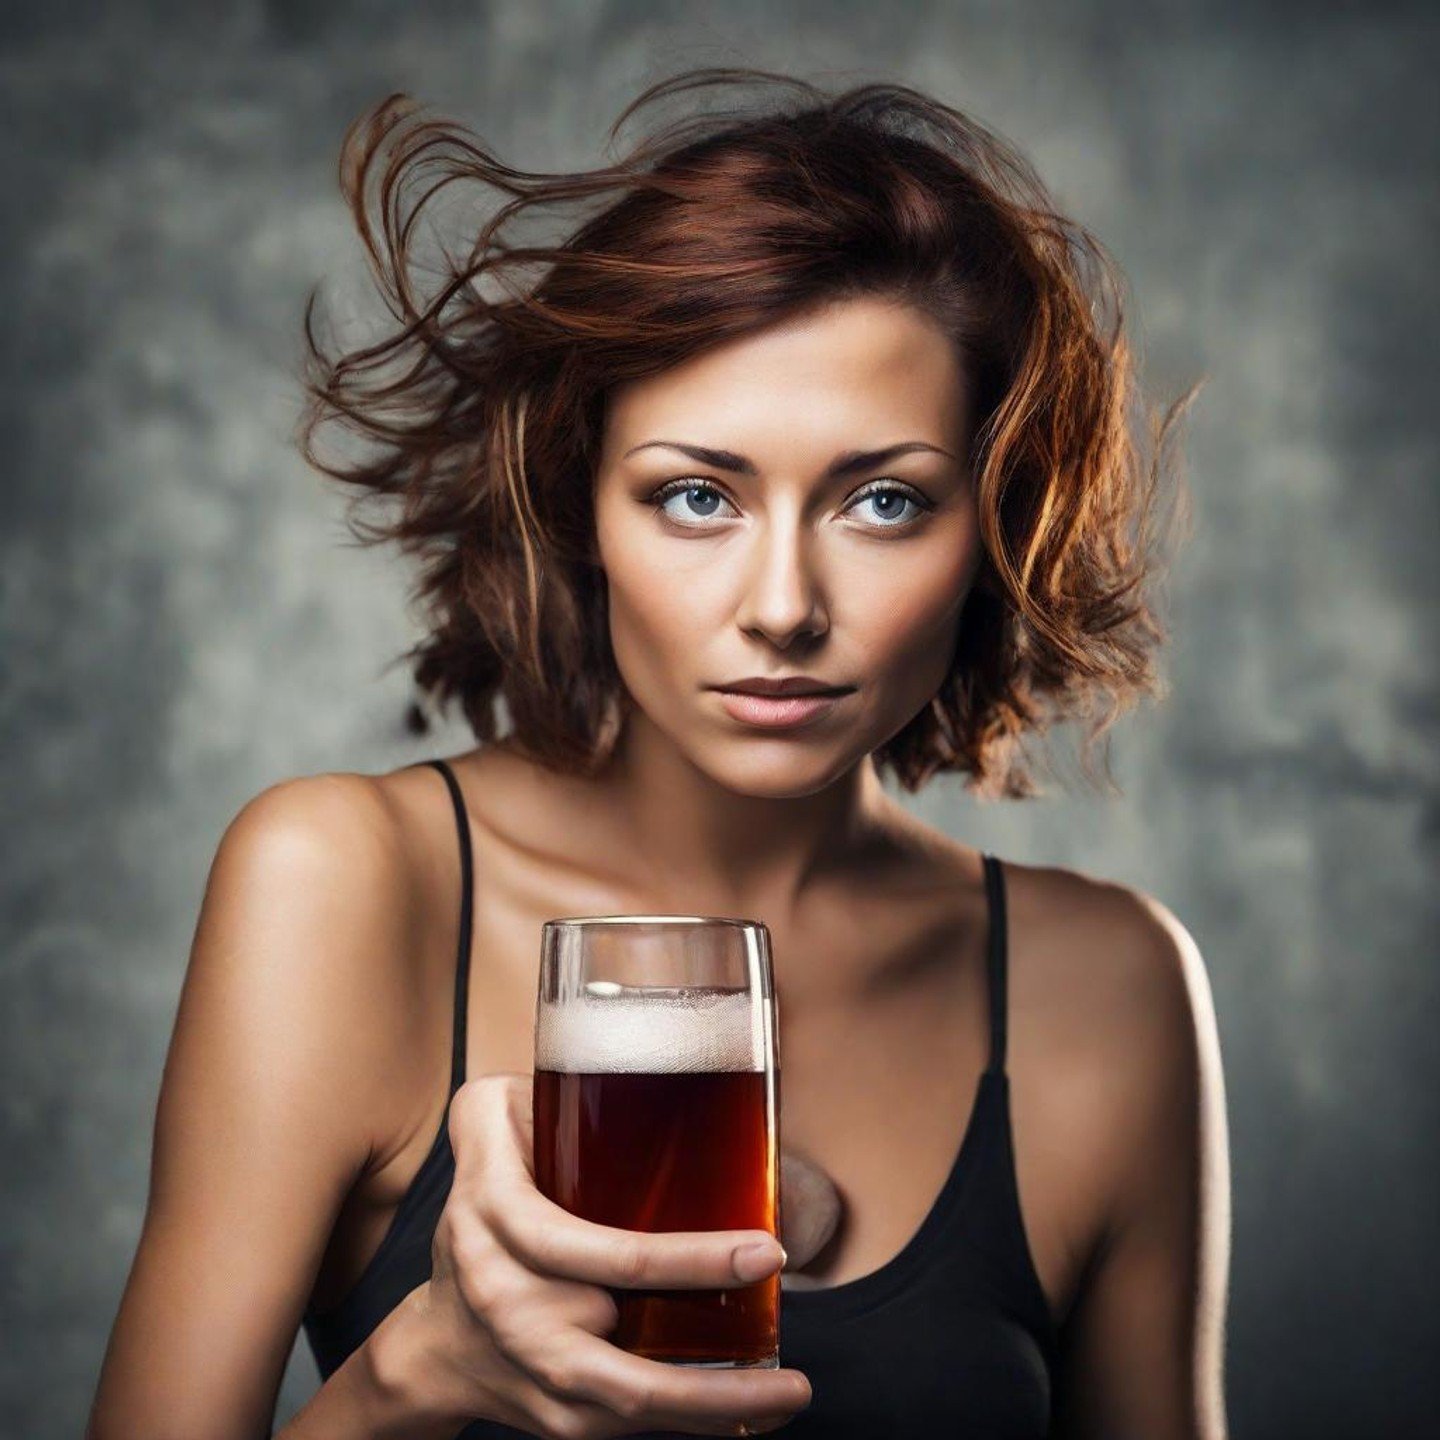 Alcohol Break: Impact on Health and Fitness